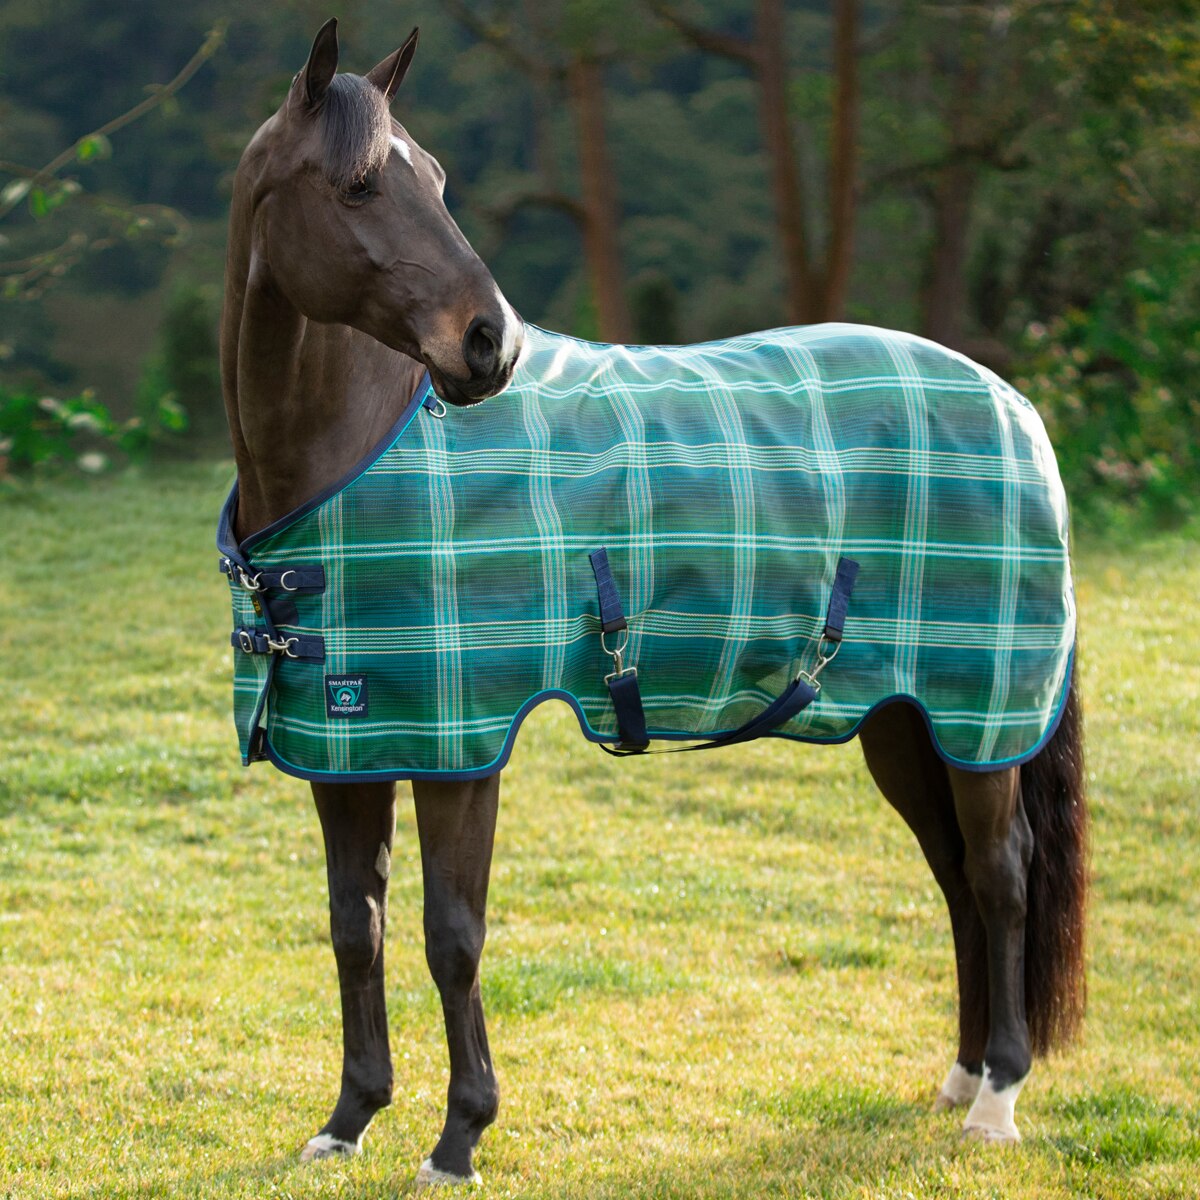 Horse Fly Sheet Mesh Rug Bug Protection Soft Insert Wither Equine Lightweight